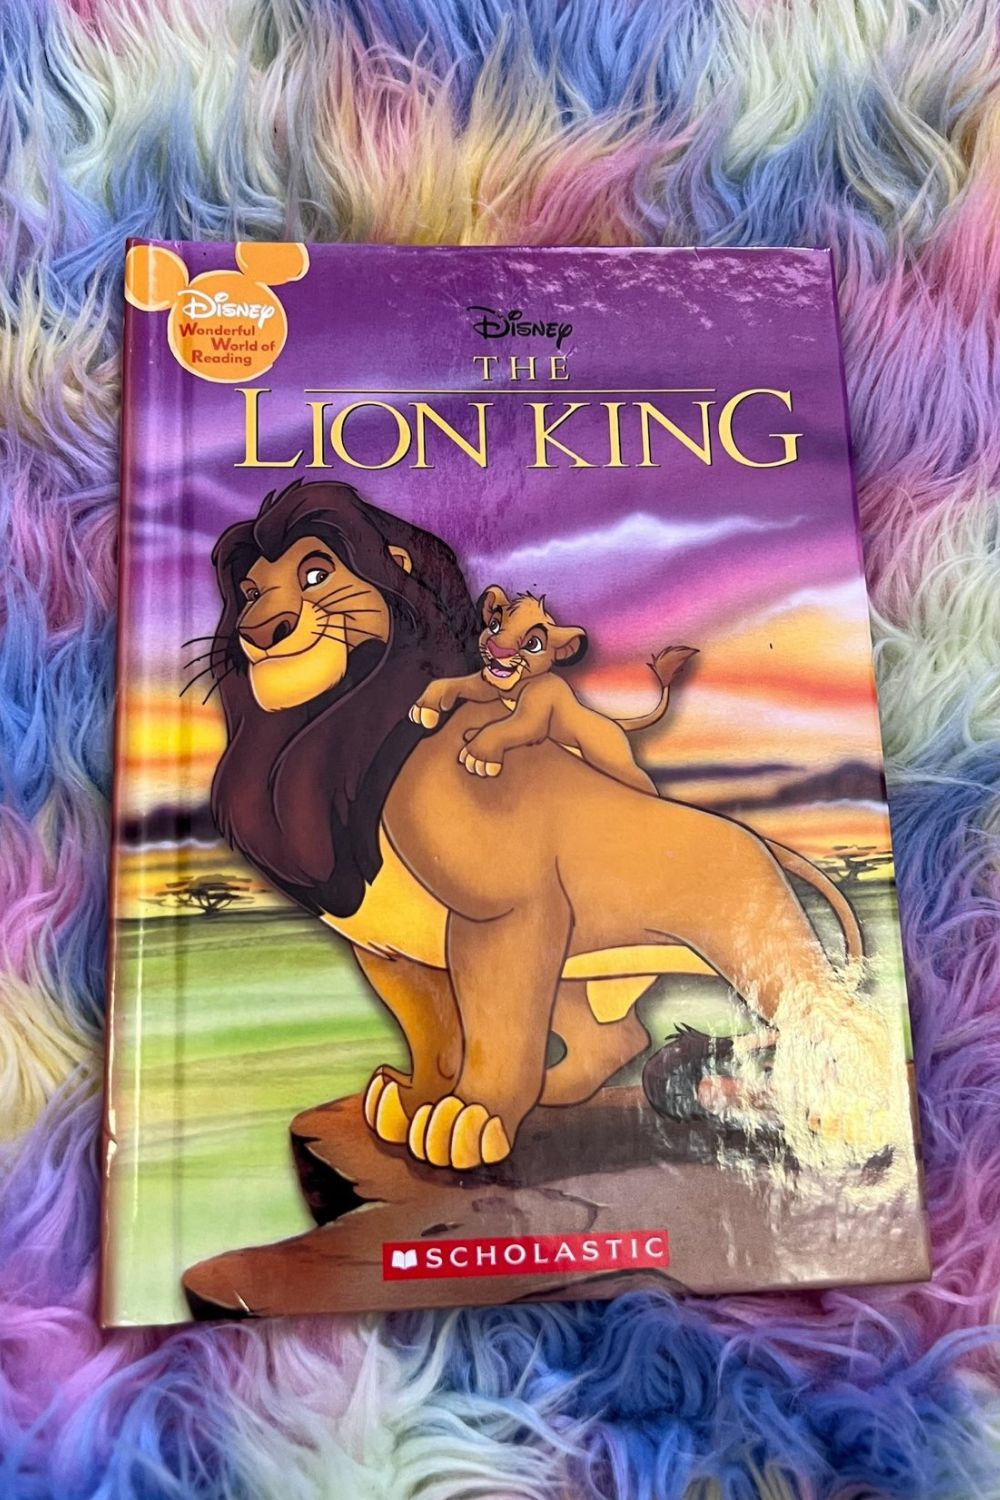 THE LION KING BOOK*